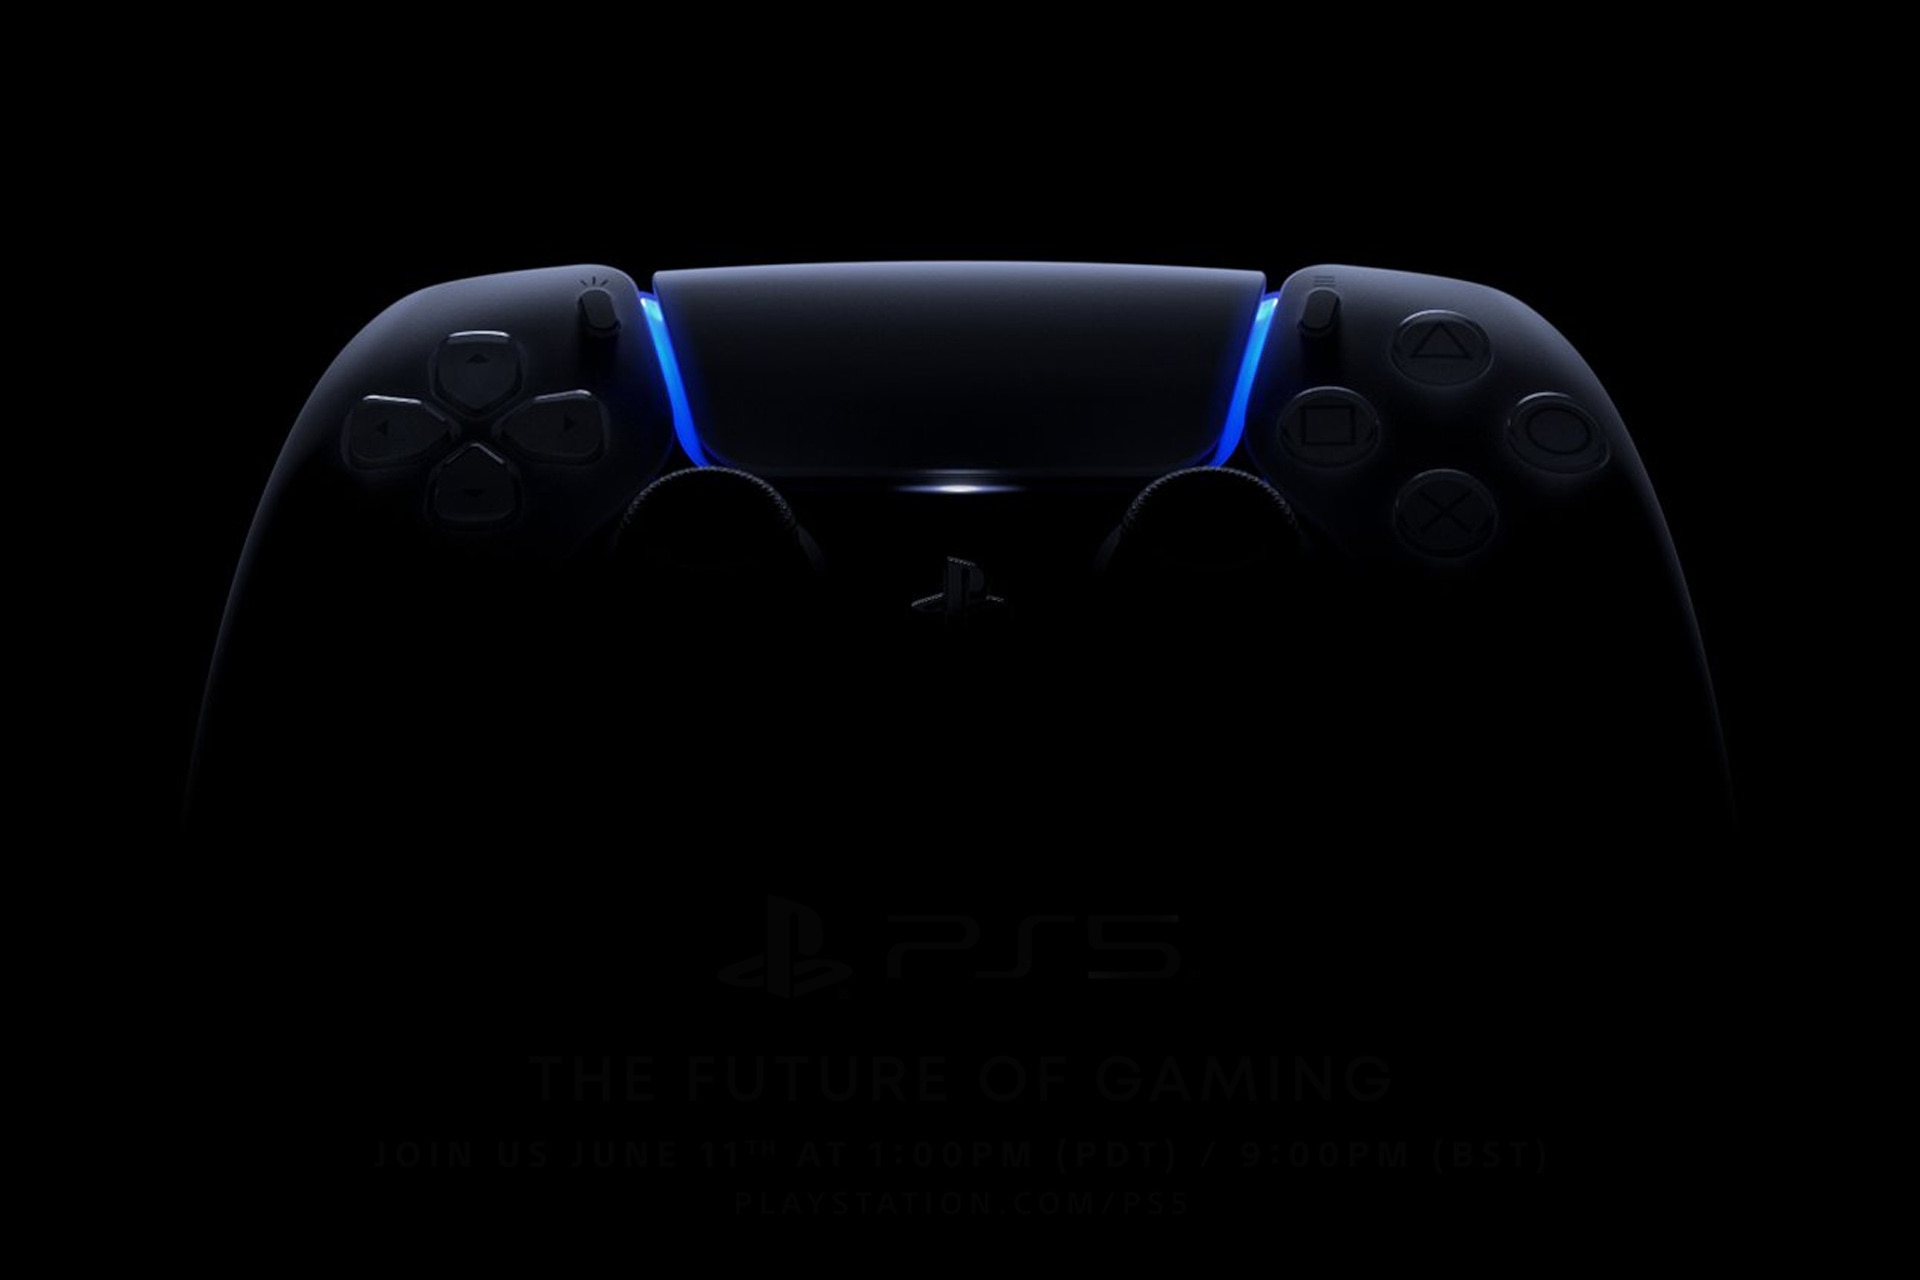 ps5 price in aud